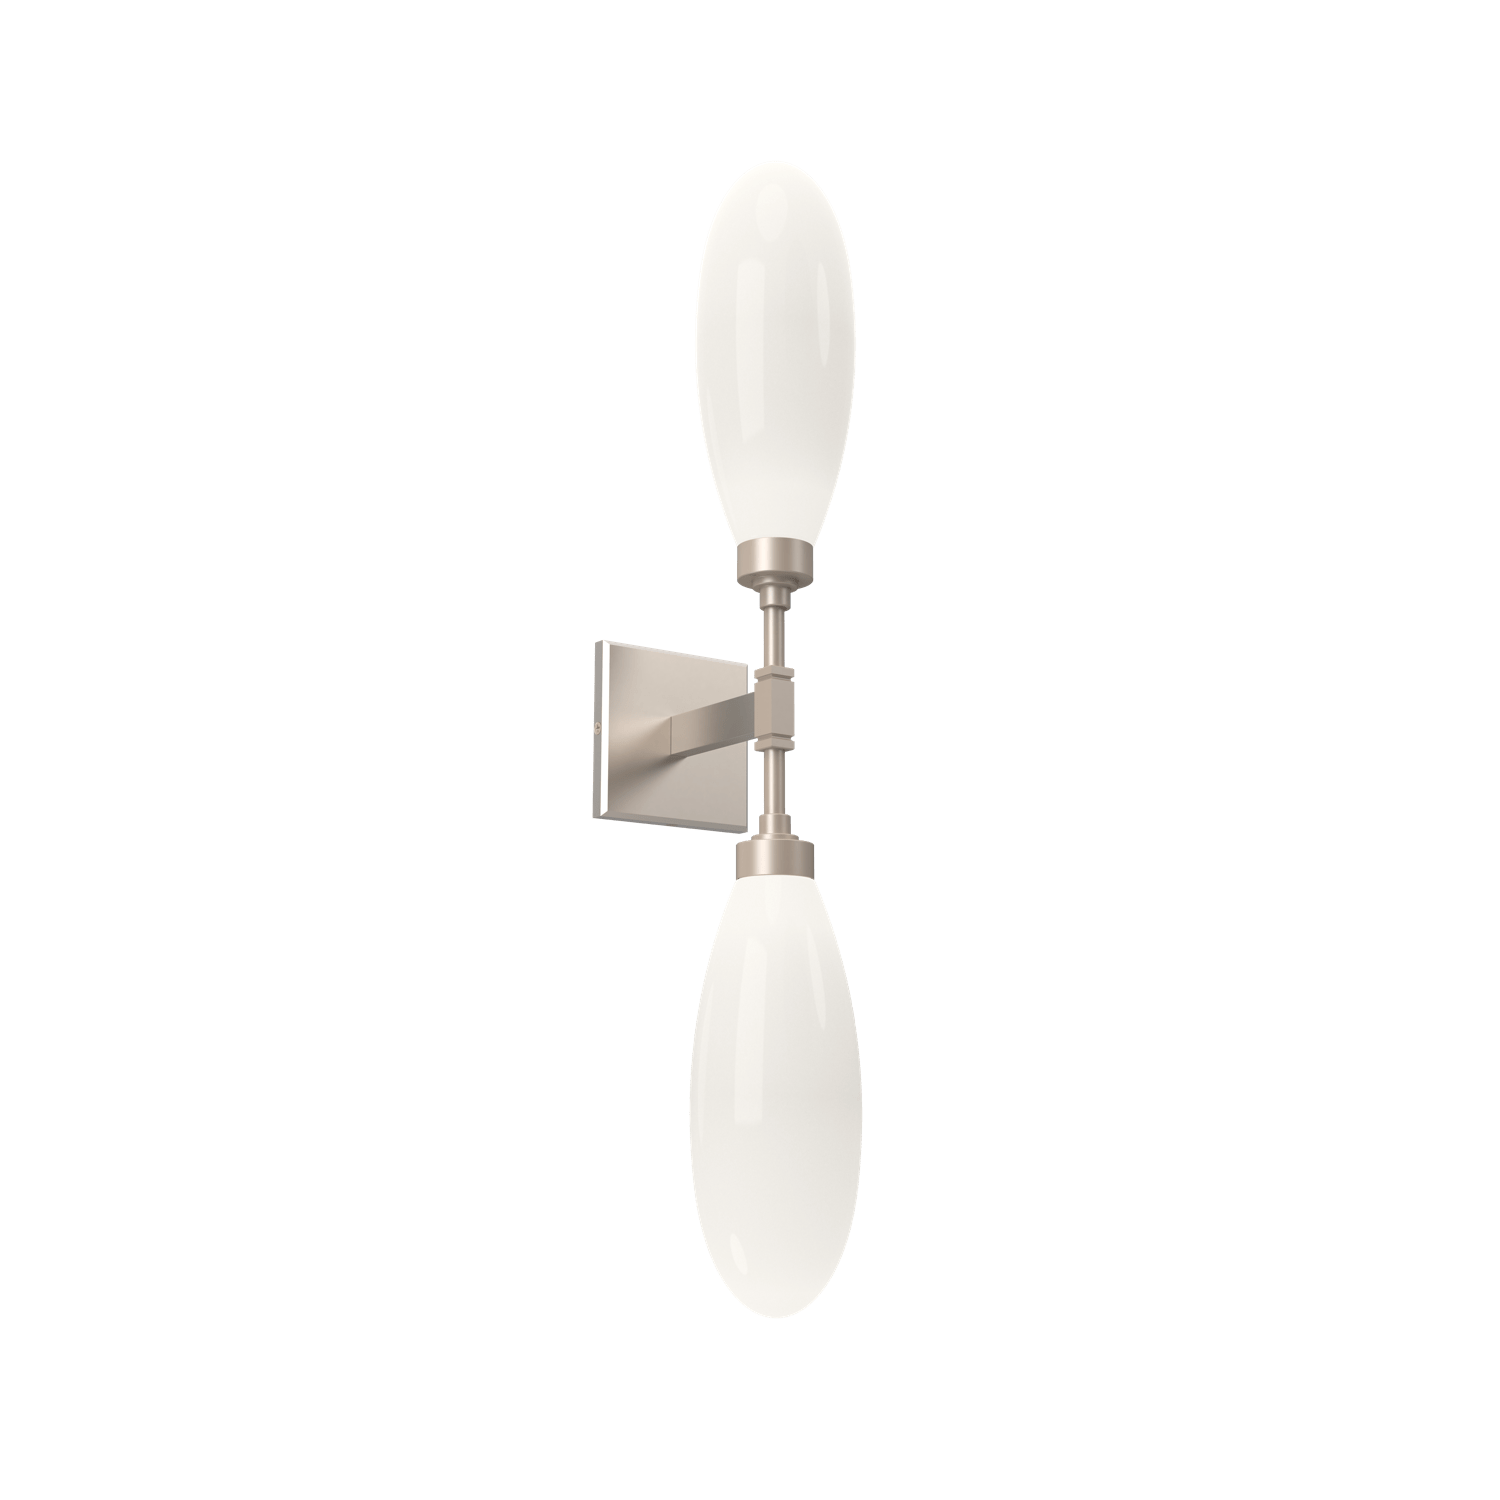 IDB0071-02-BS-WL-LL-Hammerton-Studio-Fiori-double-wall-sconce-with-metallic-beige-silver-finish-and-opal-white-glass-shades-and-LED-lamping